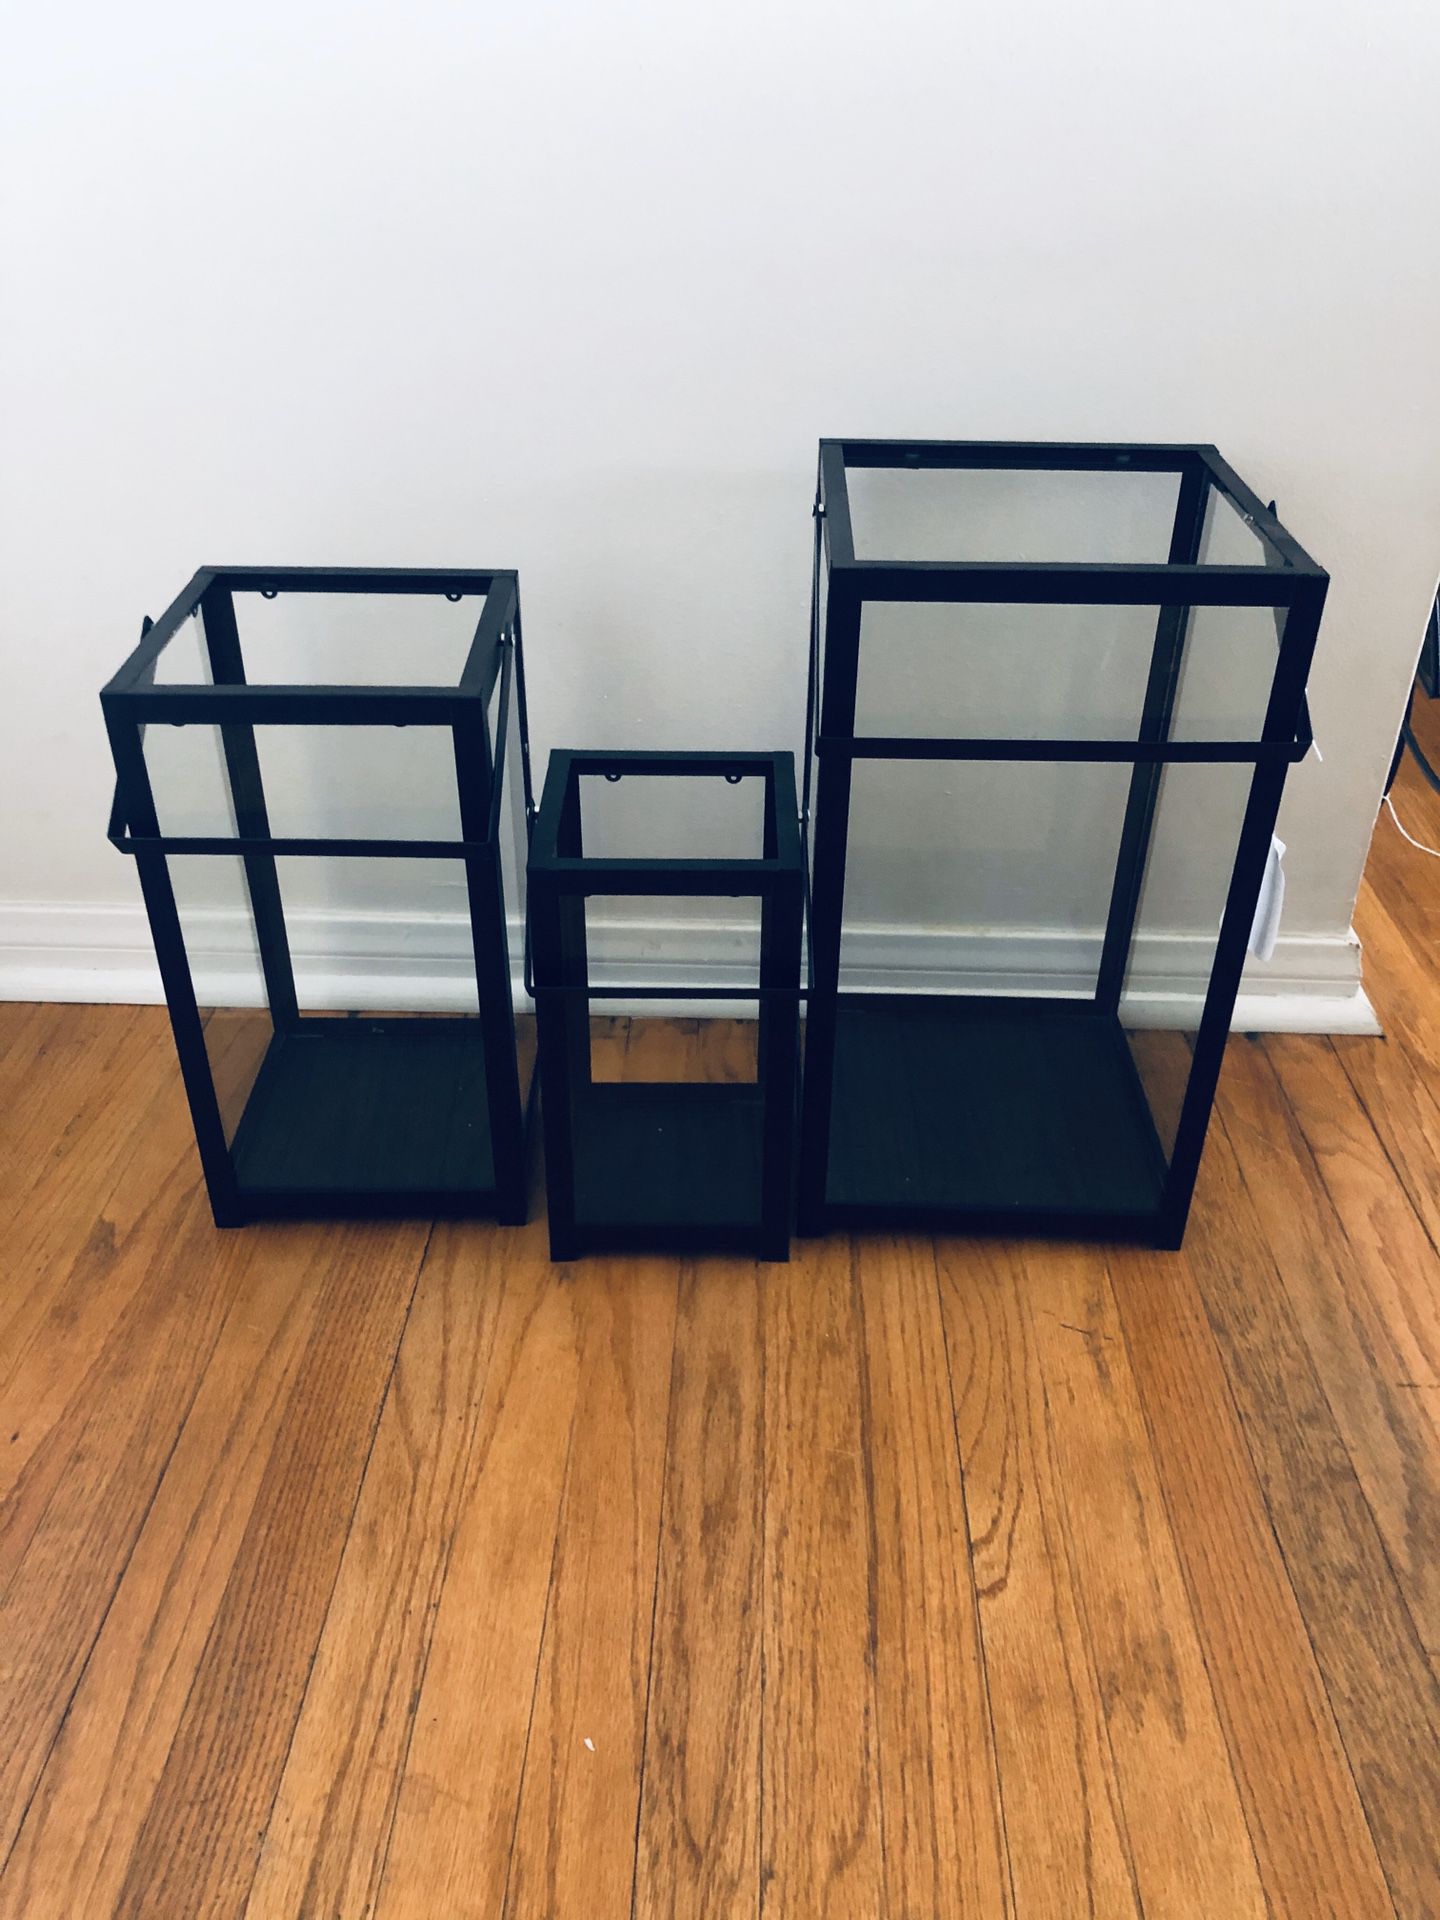 Set of Black candle holders